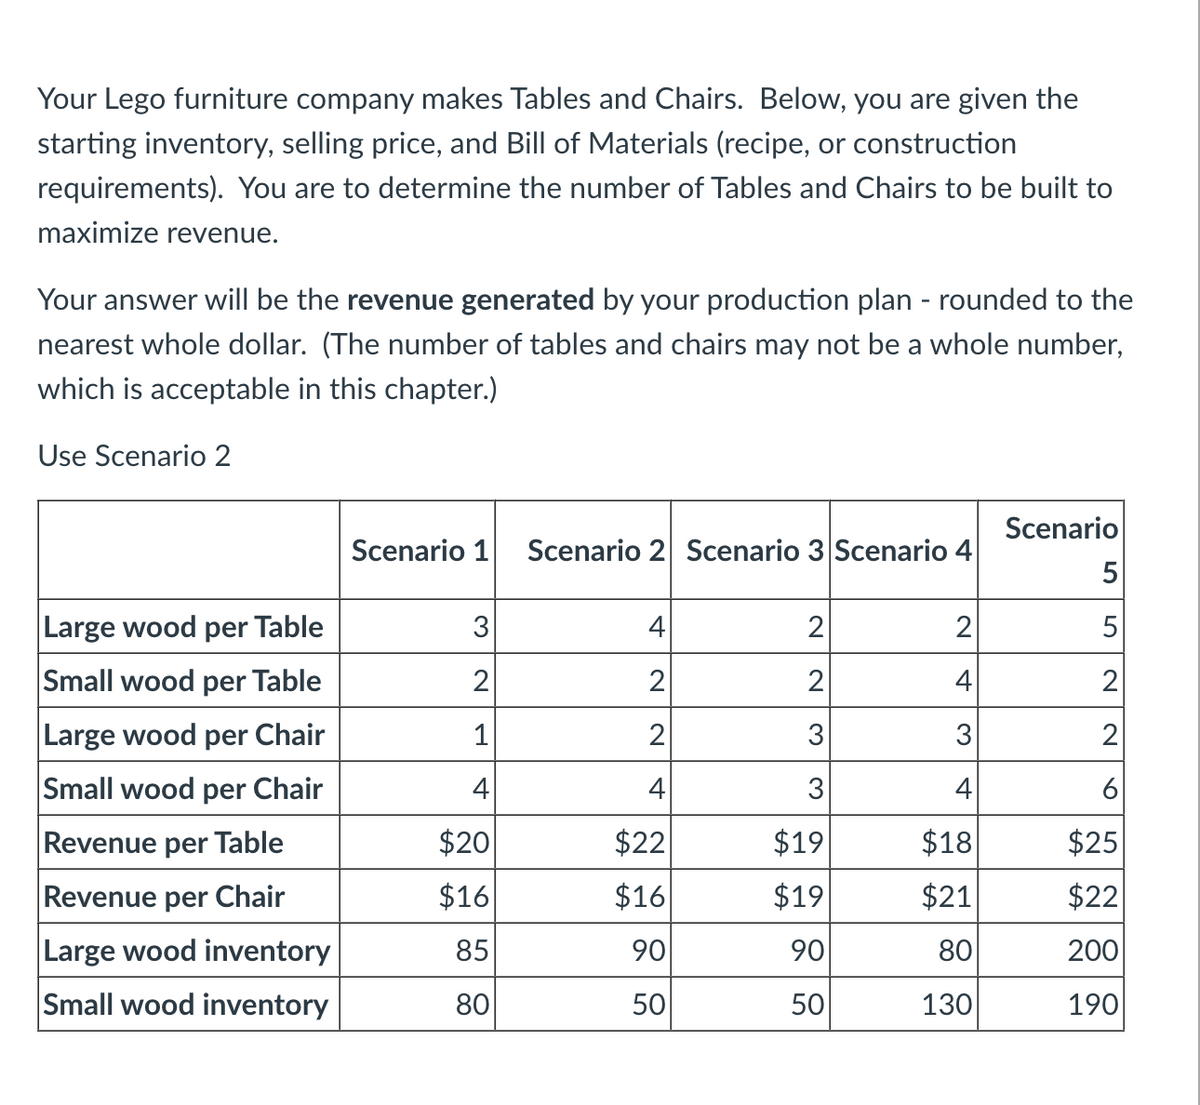 Your Lego furniture company makes Tables and Chairs. Below, you are given the
starting inventory, selling price, and Bill of Materials (recipe, or construction
requirements). You are to determine the number of Tables and Chairs to be built to
maximize revenue.
Your answer will be the revenue generated by your production plan - rounded to the
nearest whole dollar. (The number of tables and chairs may not be a whole number,
which is acceptable in this chapter.)
Use Scenario 2
Large wood per Table
Small wood per Table
Large wood per Chair
Small wood per Chair
Revenue per Table
Revenue per Chair
Large wood inventory
Small wood inventory
Scenario 1
3
2
1
+
$20
$16
85
80
Scenario 2 Scenario 3 Scenario 4
4
2
2
4
$22
$16
90
50
2
2
3
3
$19
$19
90
50
2
+
3
4
$18
$21
80
130
Scenario
5
5
2
2
60
$25
$22
200
190